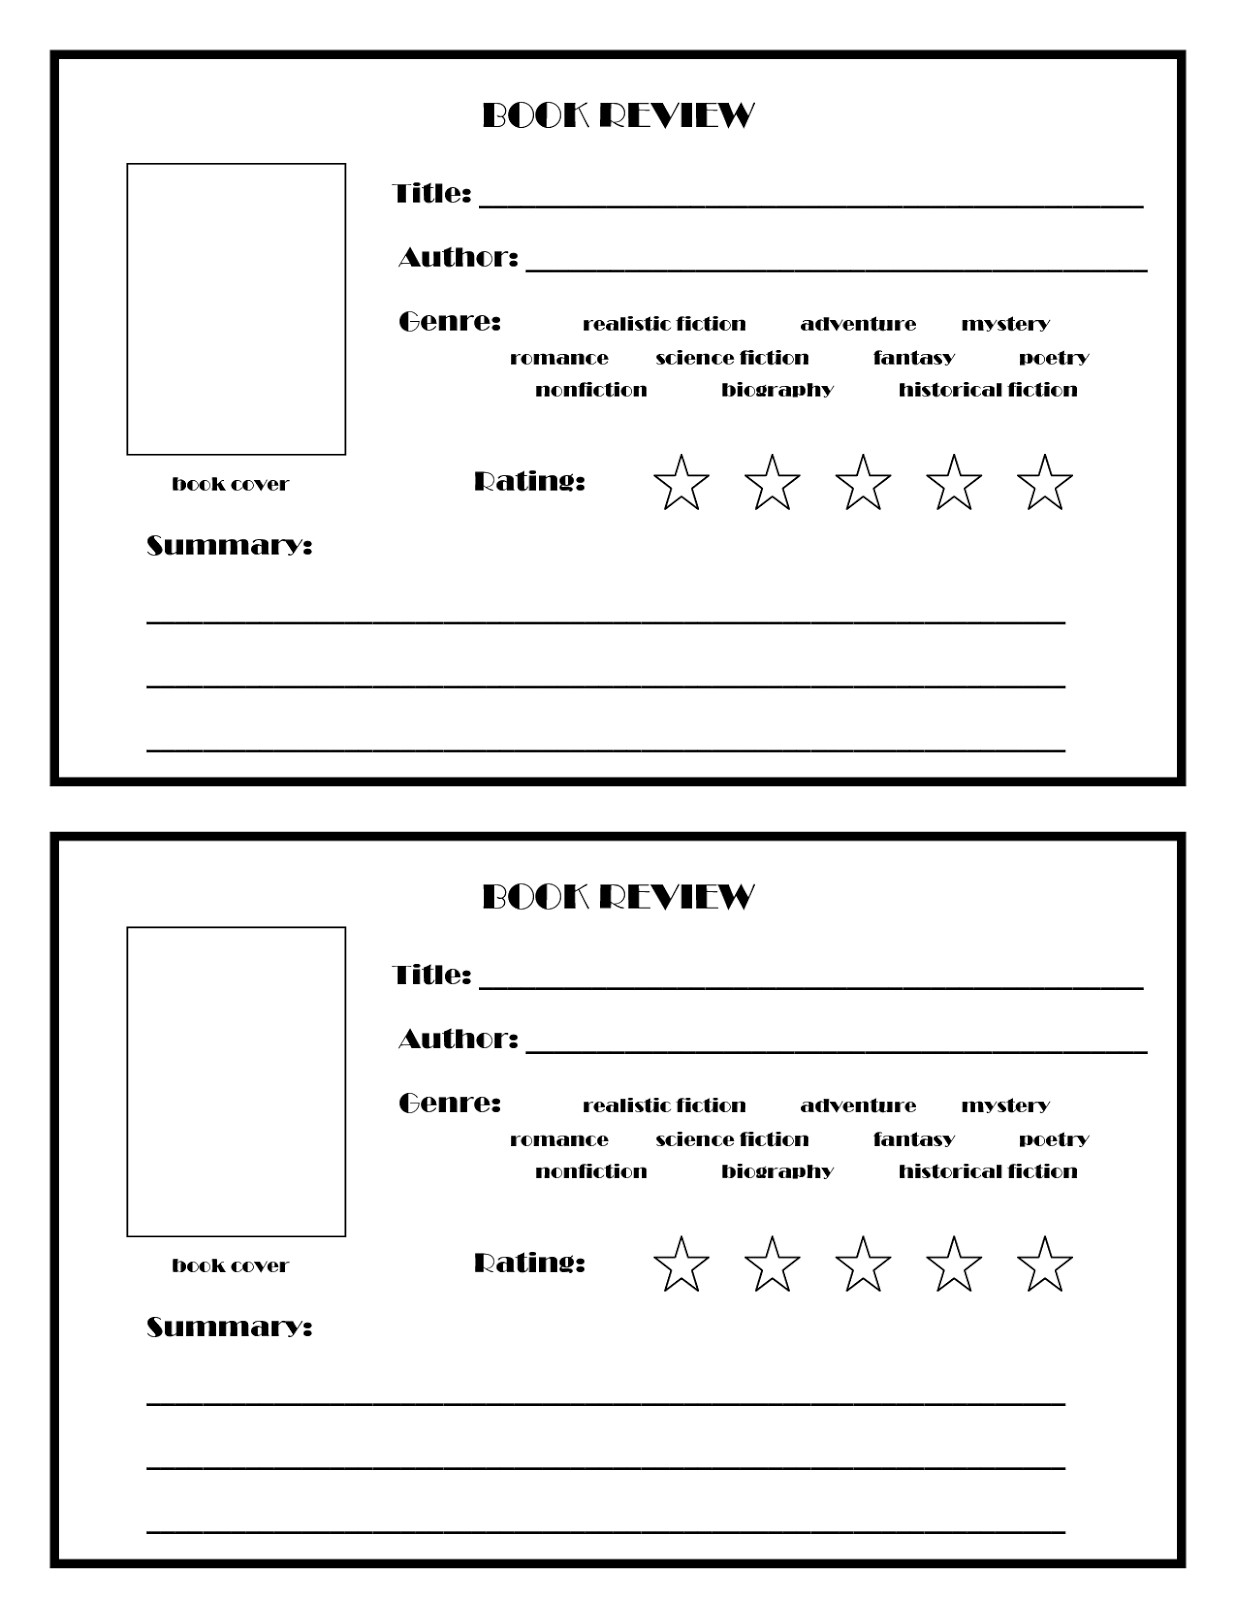 7 Best Images of Book Review Printable Template Book Review Template